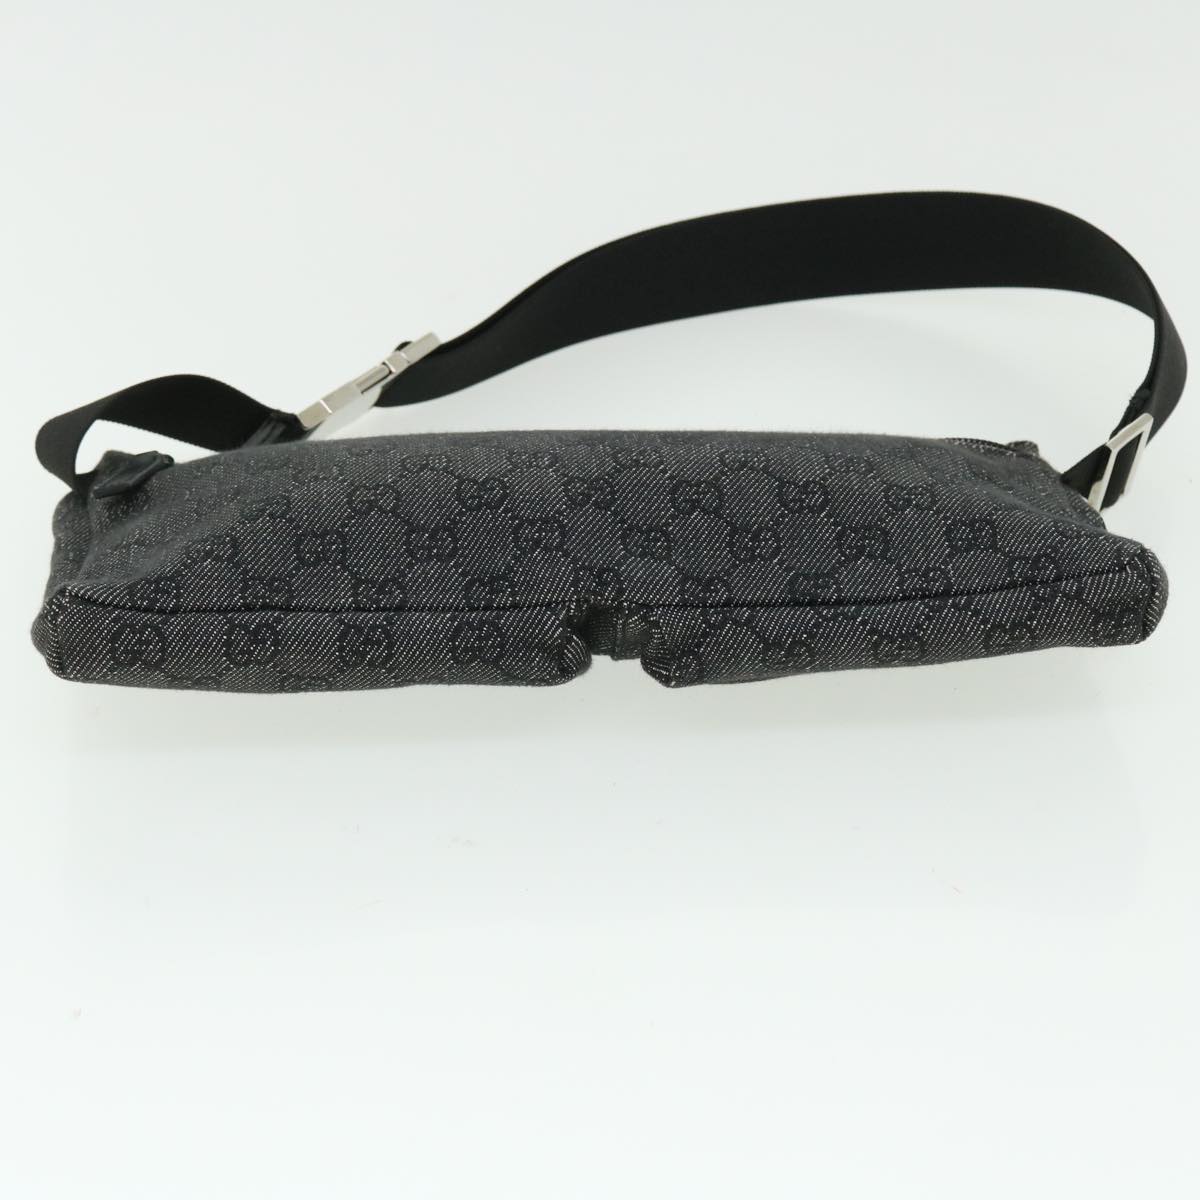 GUCCI GG Canvas Waist bag Leather Gray 28566 Auth 51469